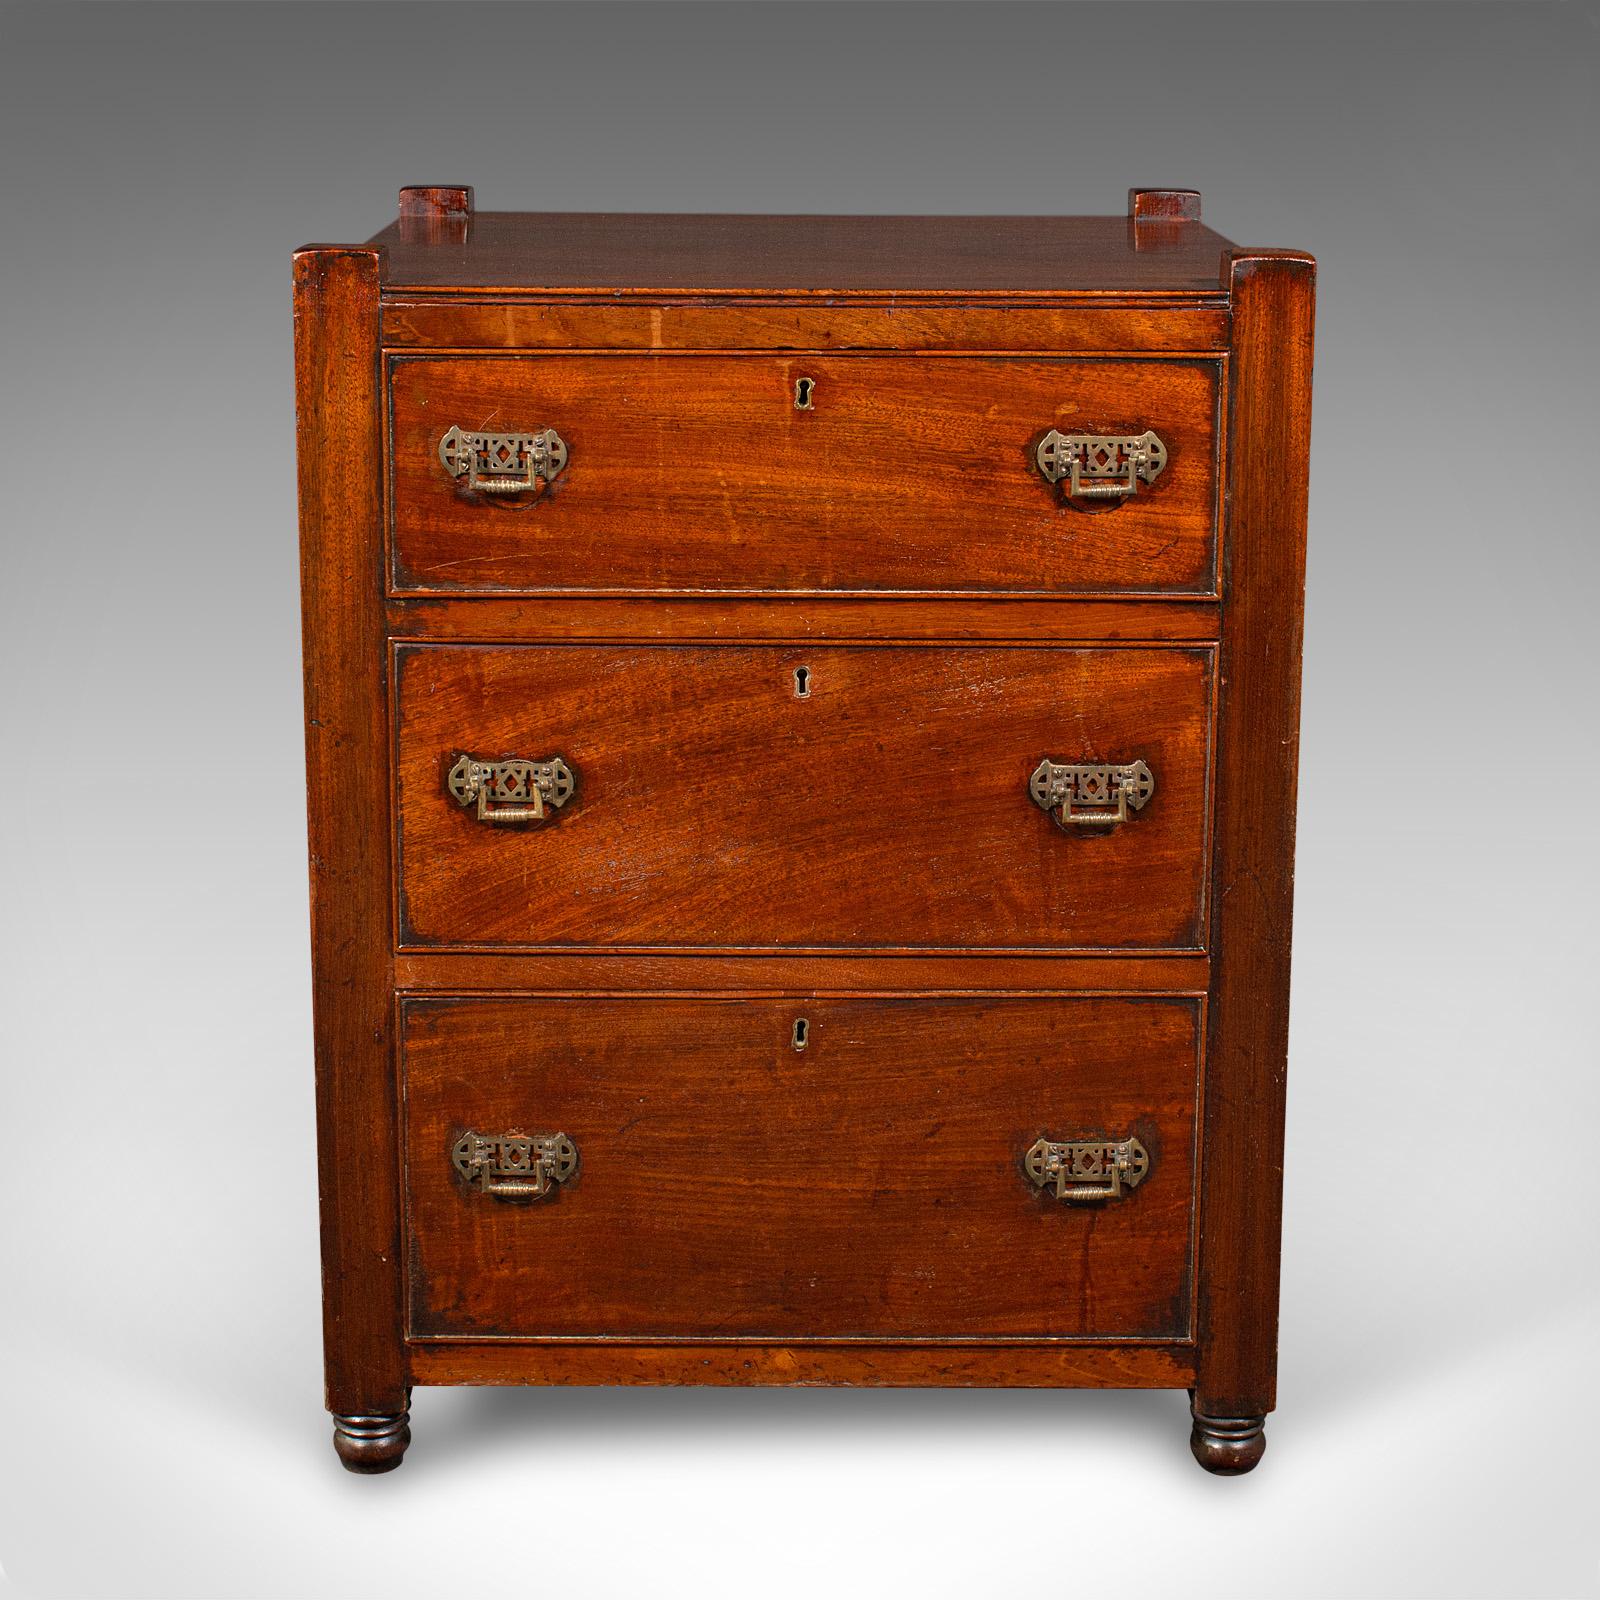 British Antique Gentleman's Nightstand, English, Bedside Chest of Drawers, Georgian For Sale